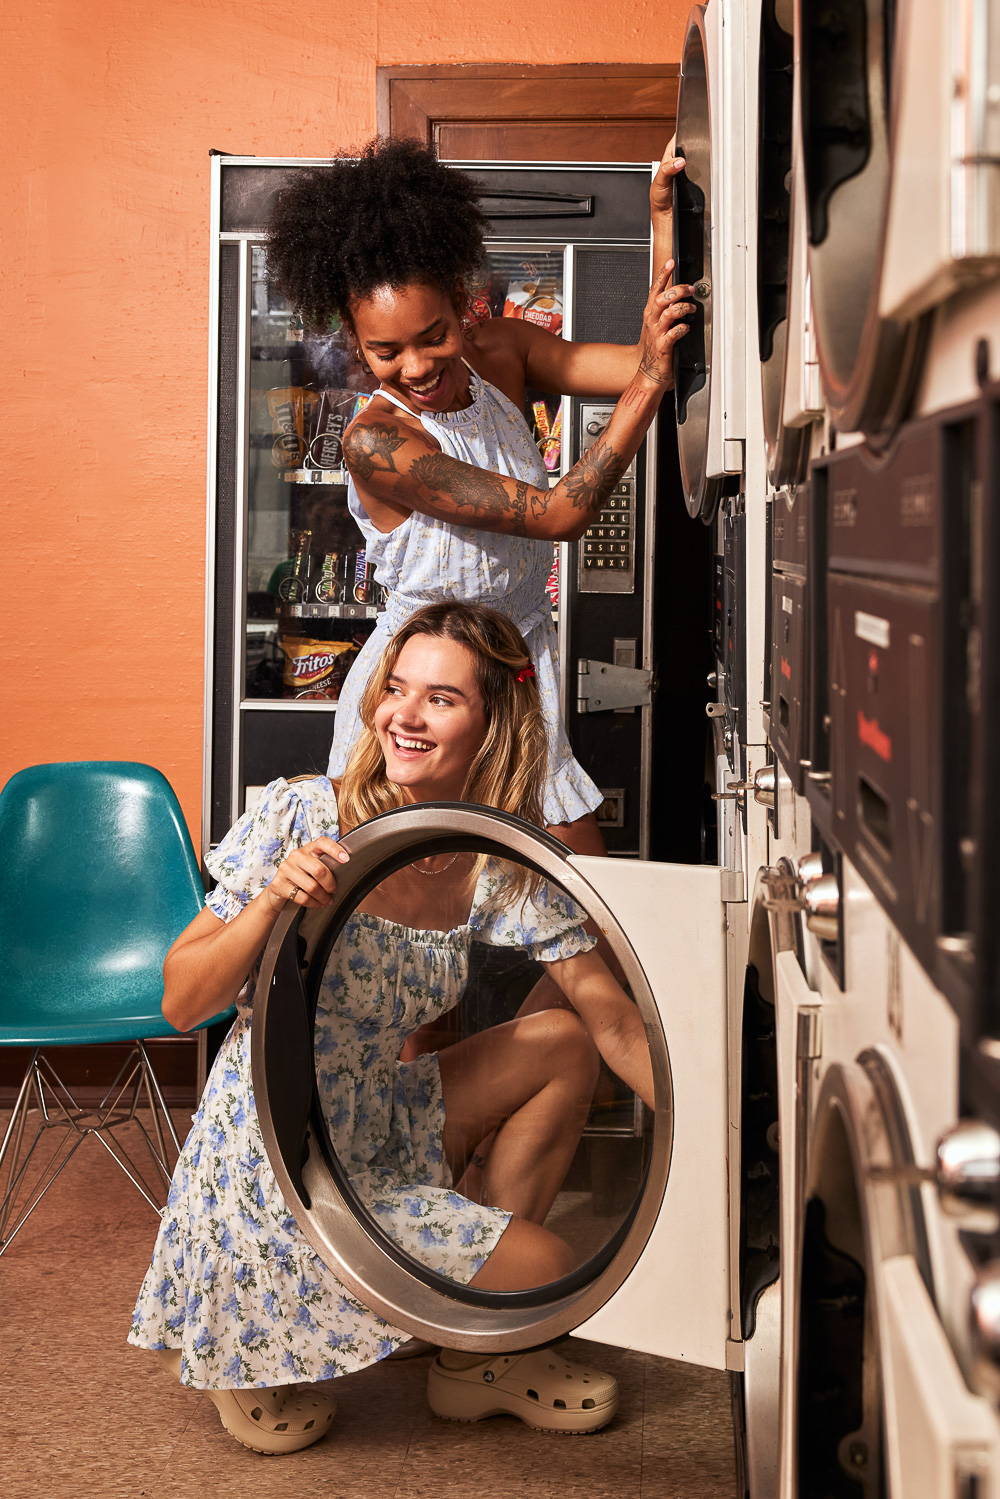 Trixxi Back to school embracing dorm life doing laundry hanging out in a blue floral printed romper and white with blue floral print tier dress.